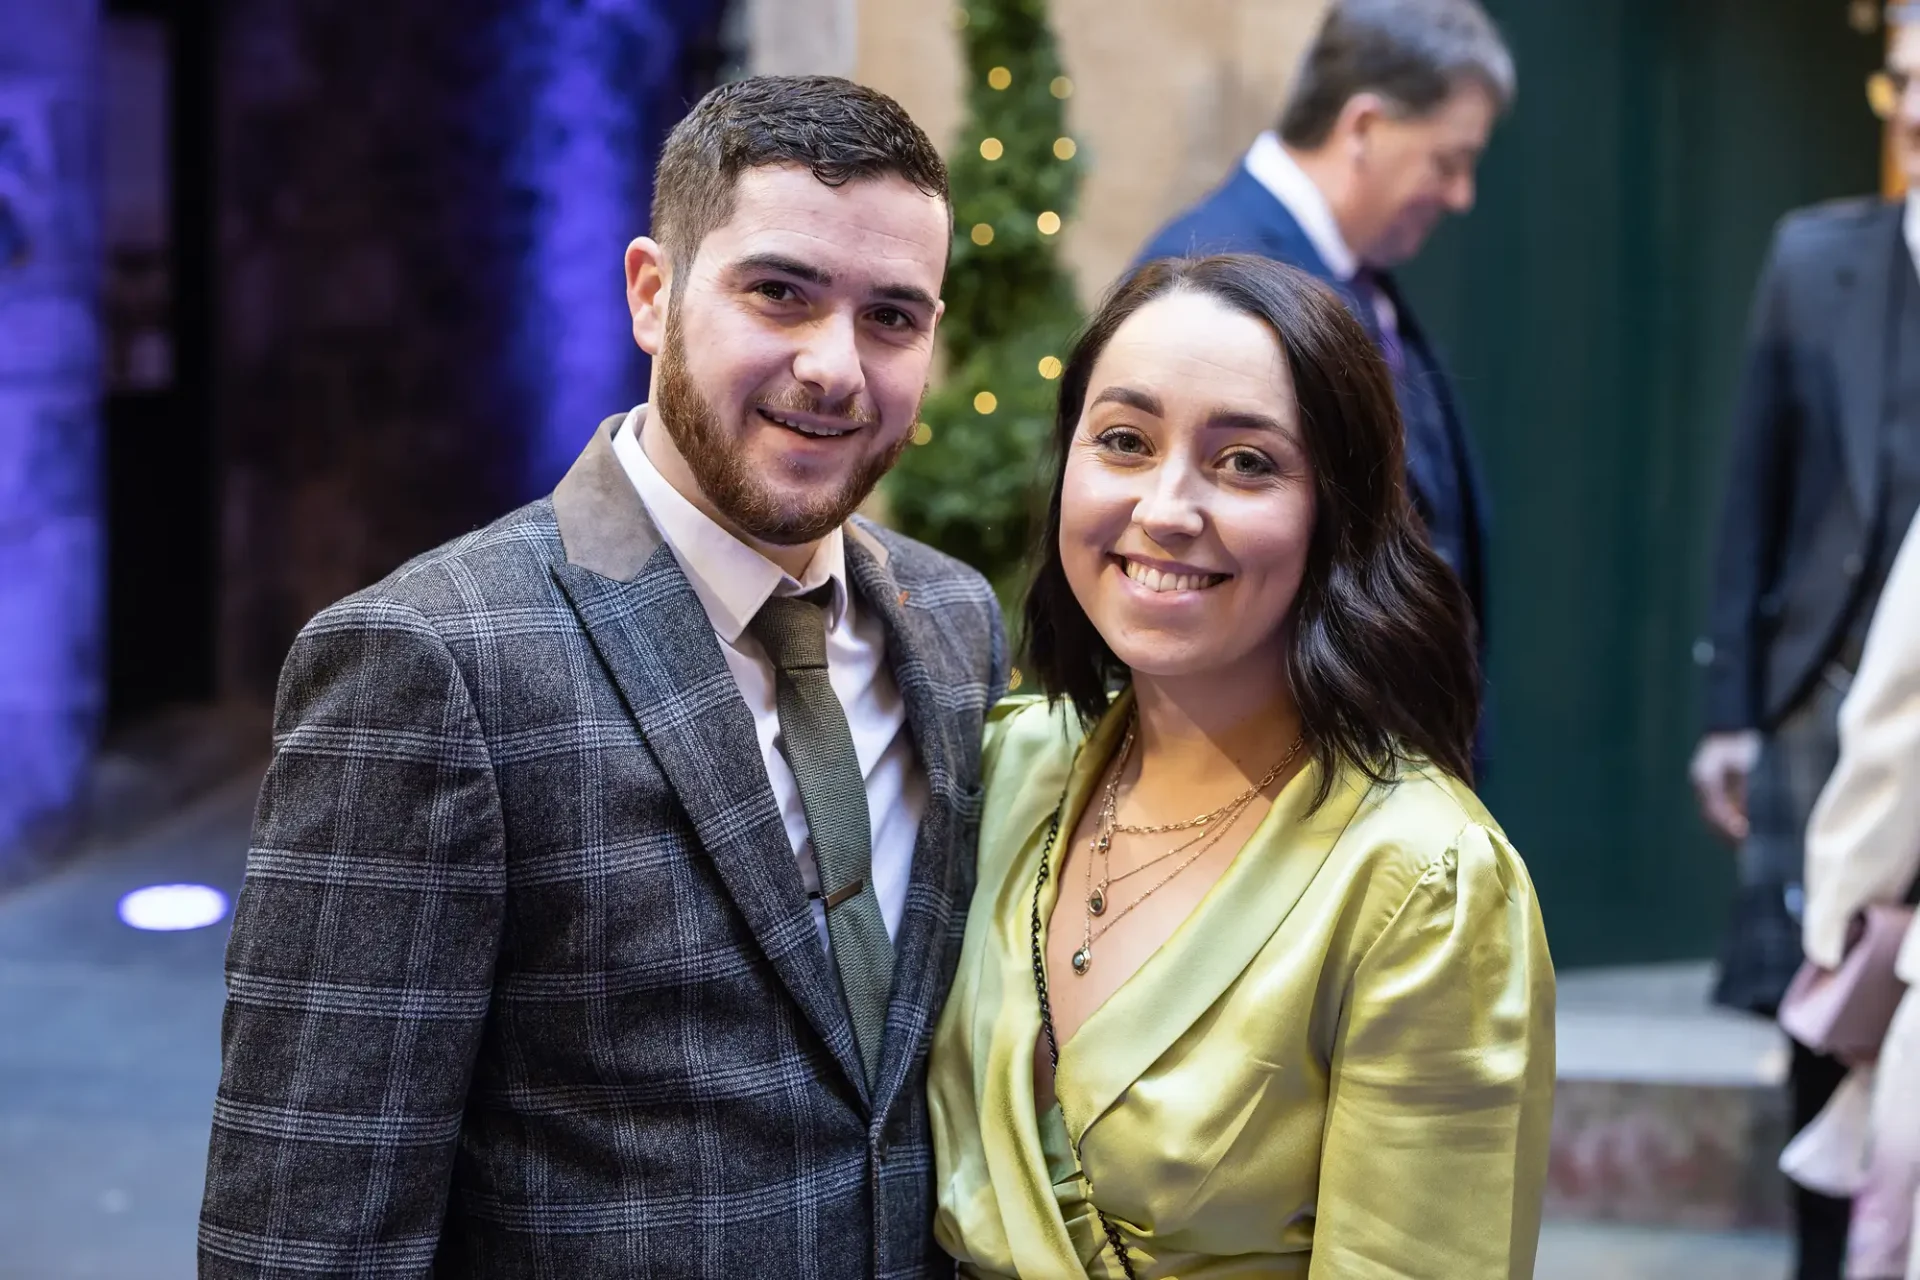 A smiling couple, the man in a plaid suit and the woman in a yellow dress, posing together at a formal event with festive decorations in the background.